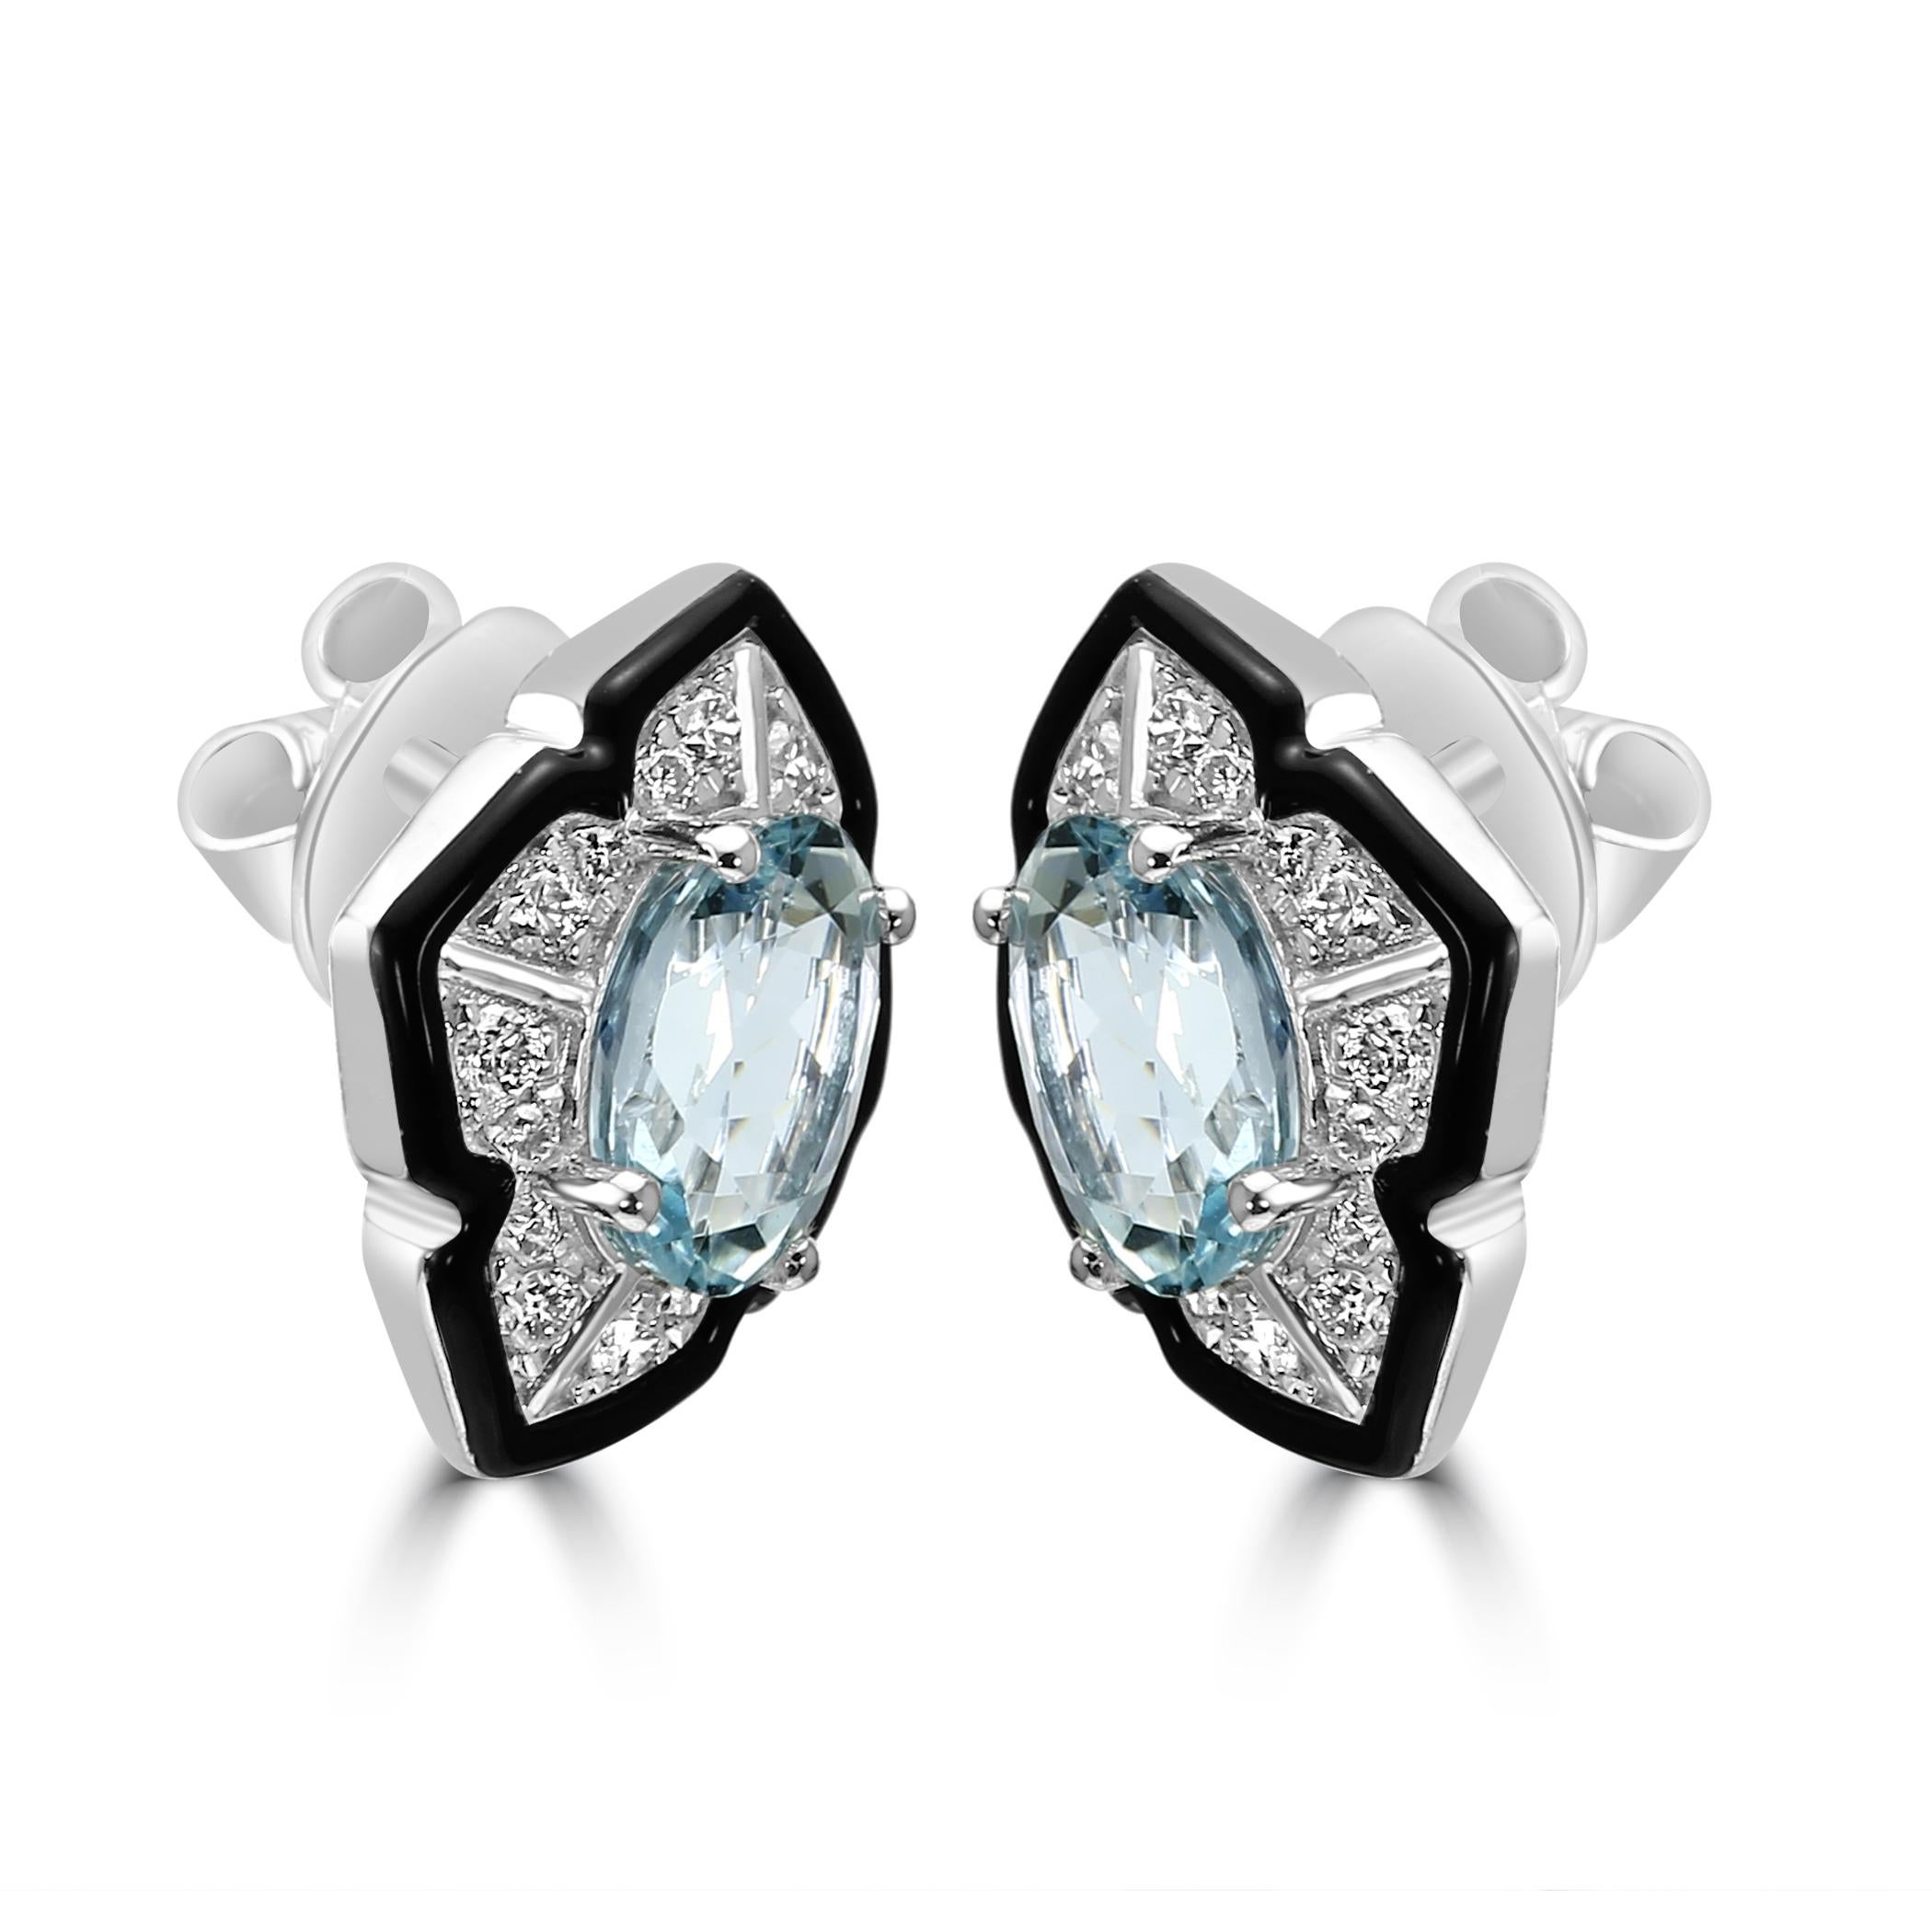 Step into the glamorous world of Art Deco with our 14K White Gold Art-Deco look earrings, a stunning combination of vintage-inspired design and modern sophistication. 

The focal point of these earrings is the beautiful Aquamarine  Oval in each